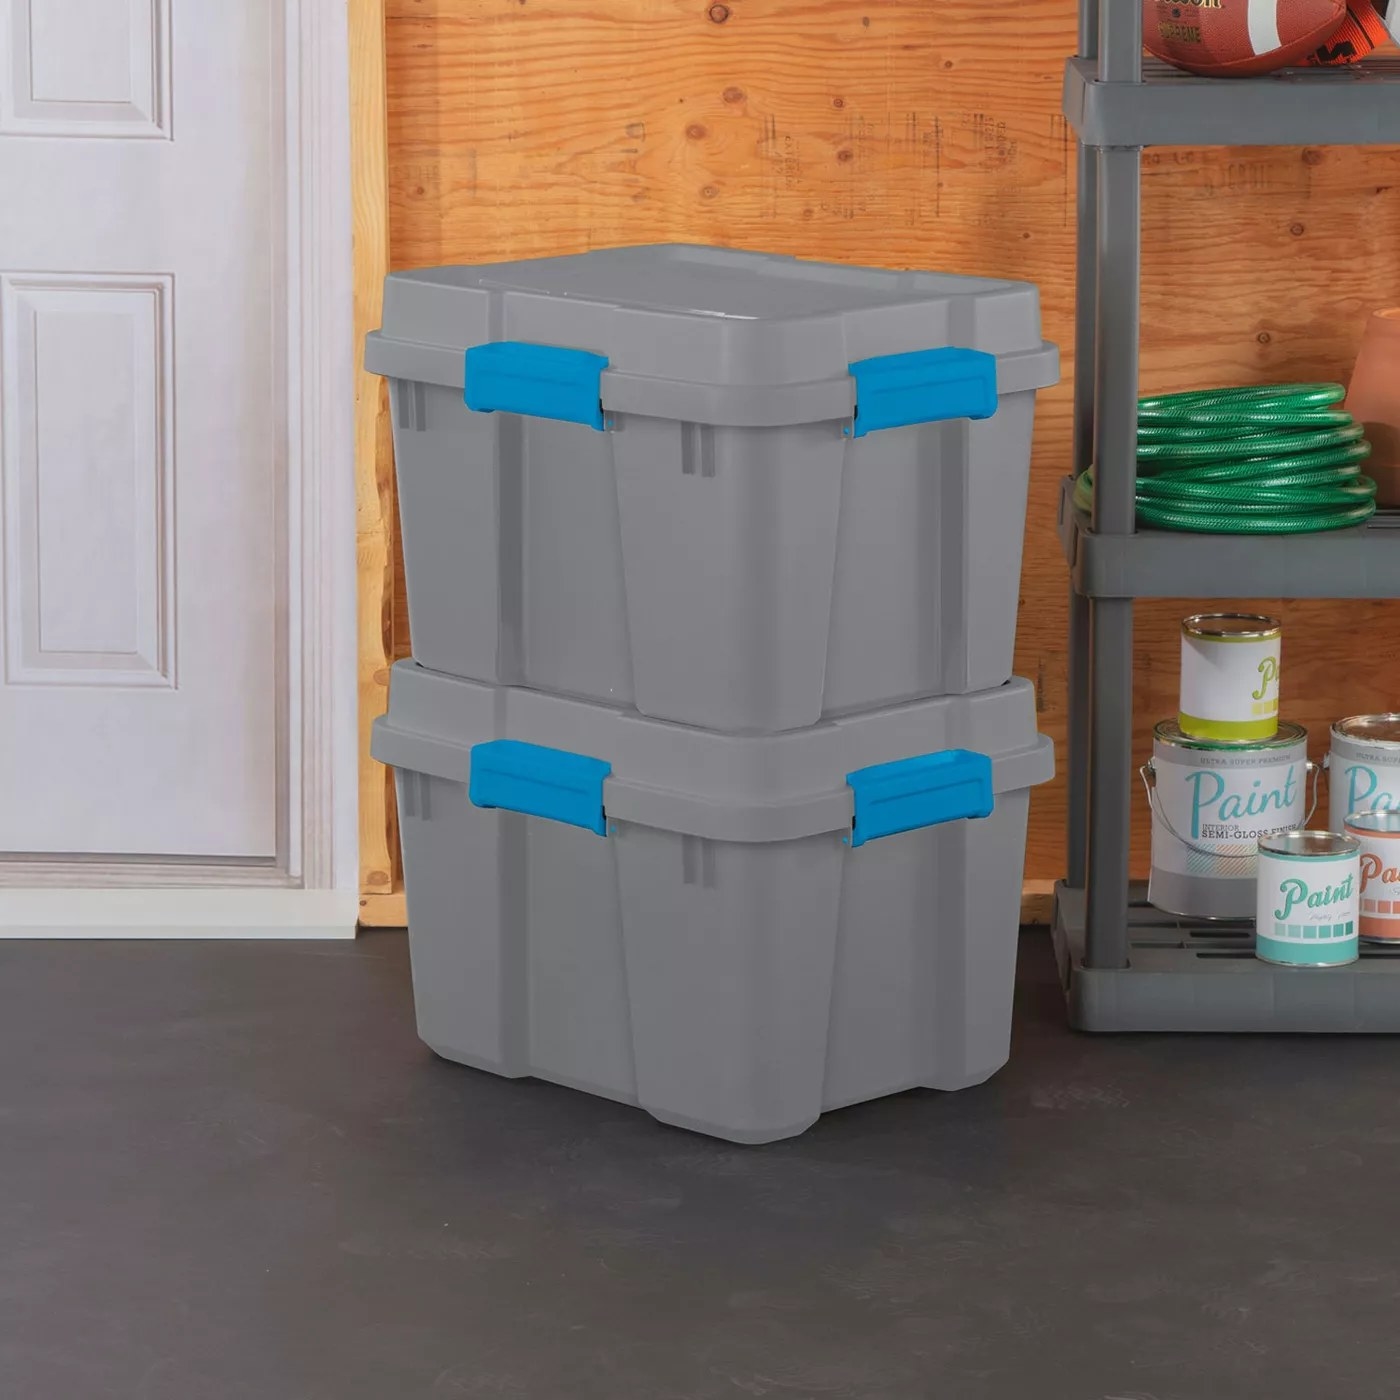 The gray and blue storage boxes